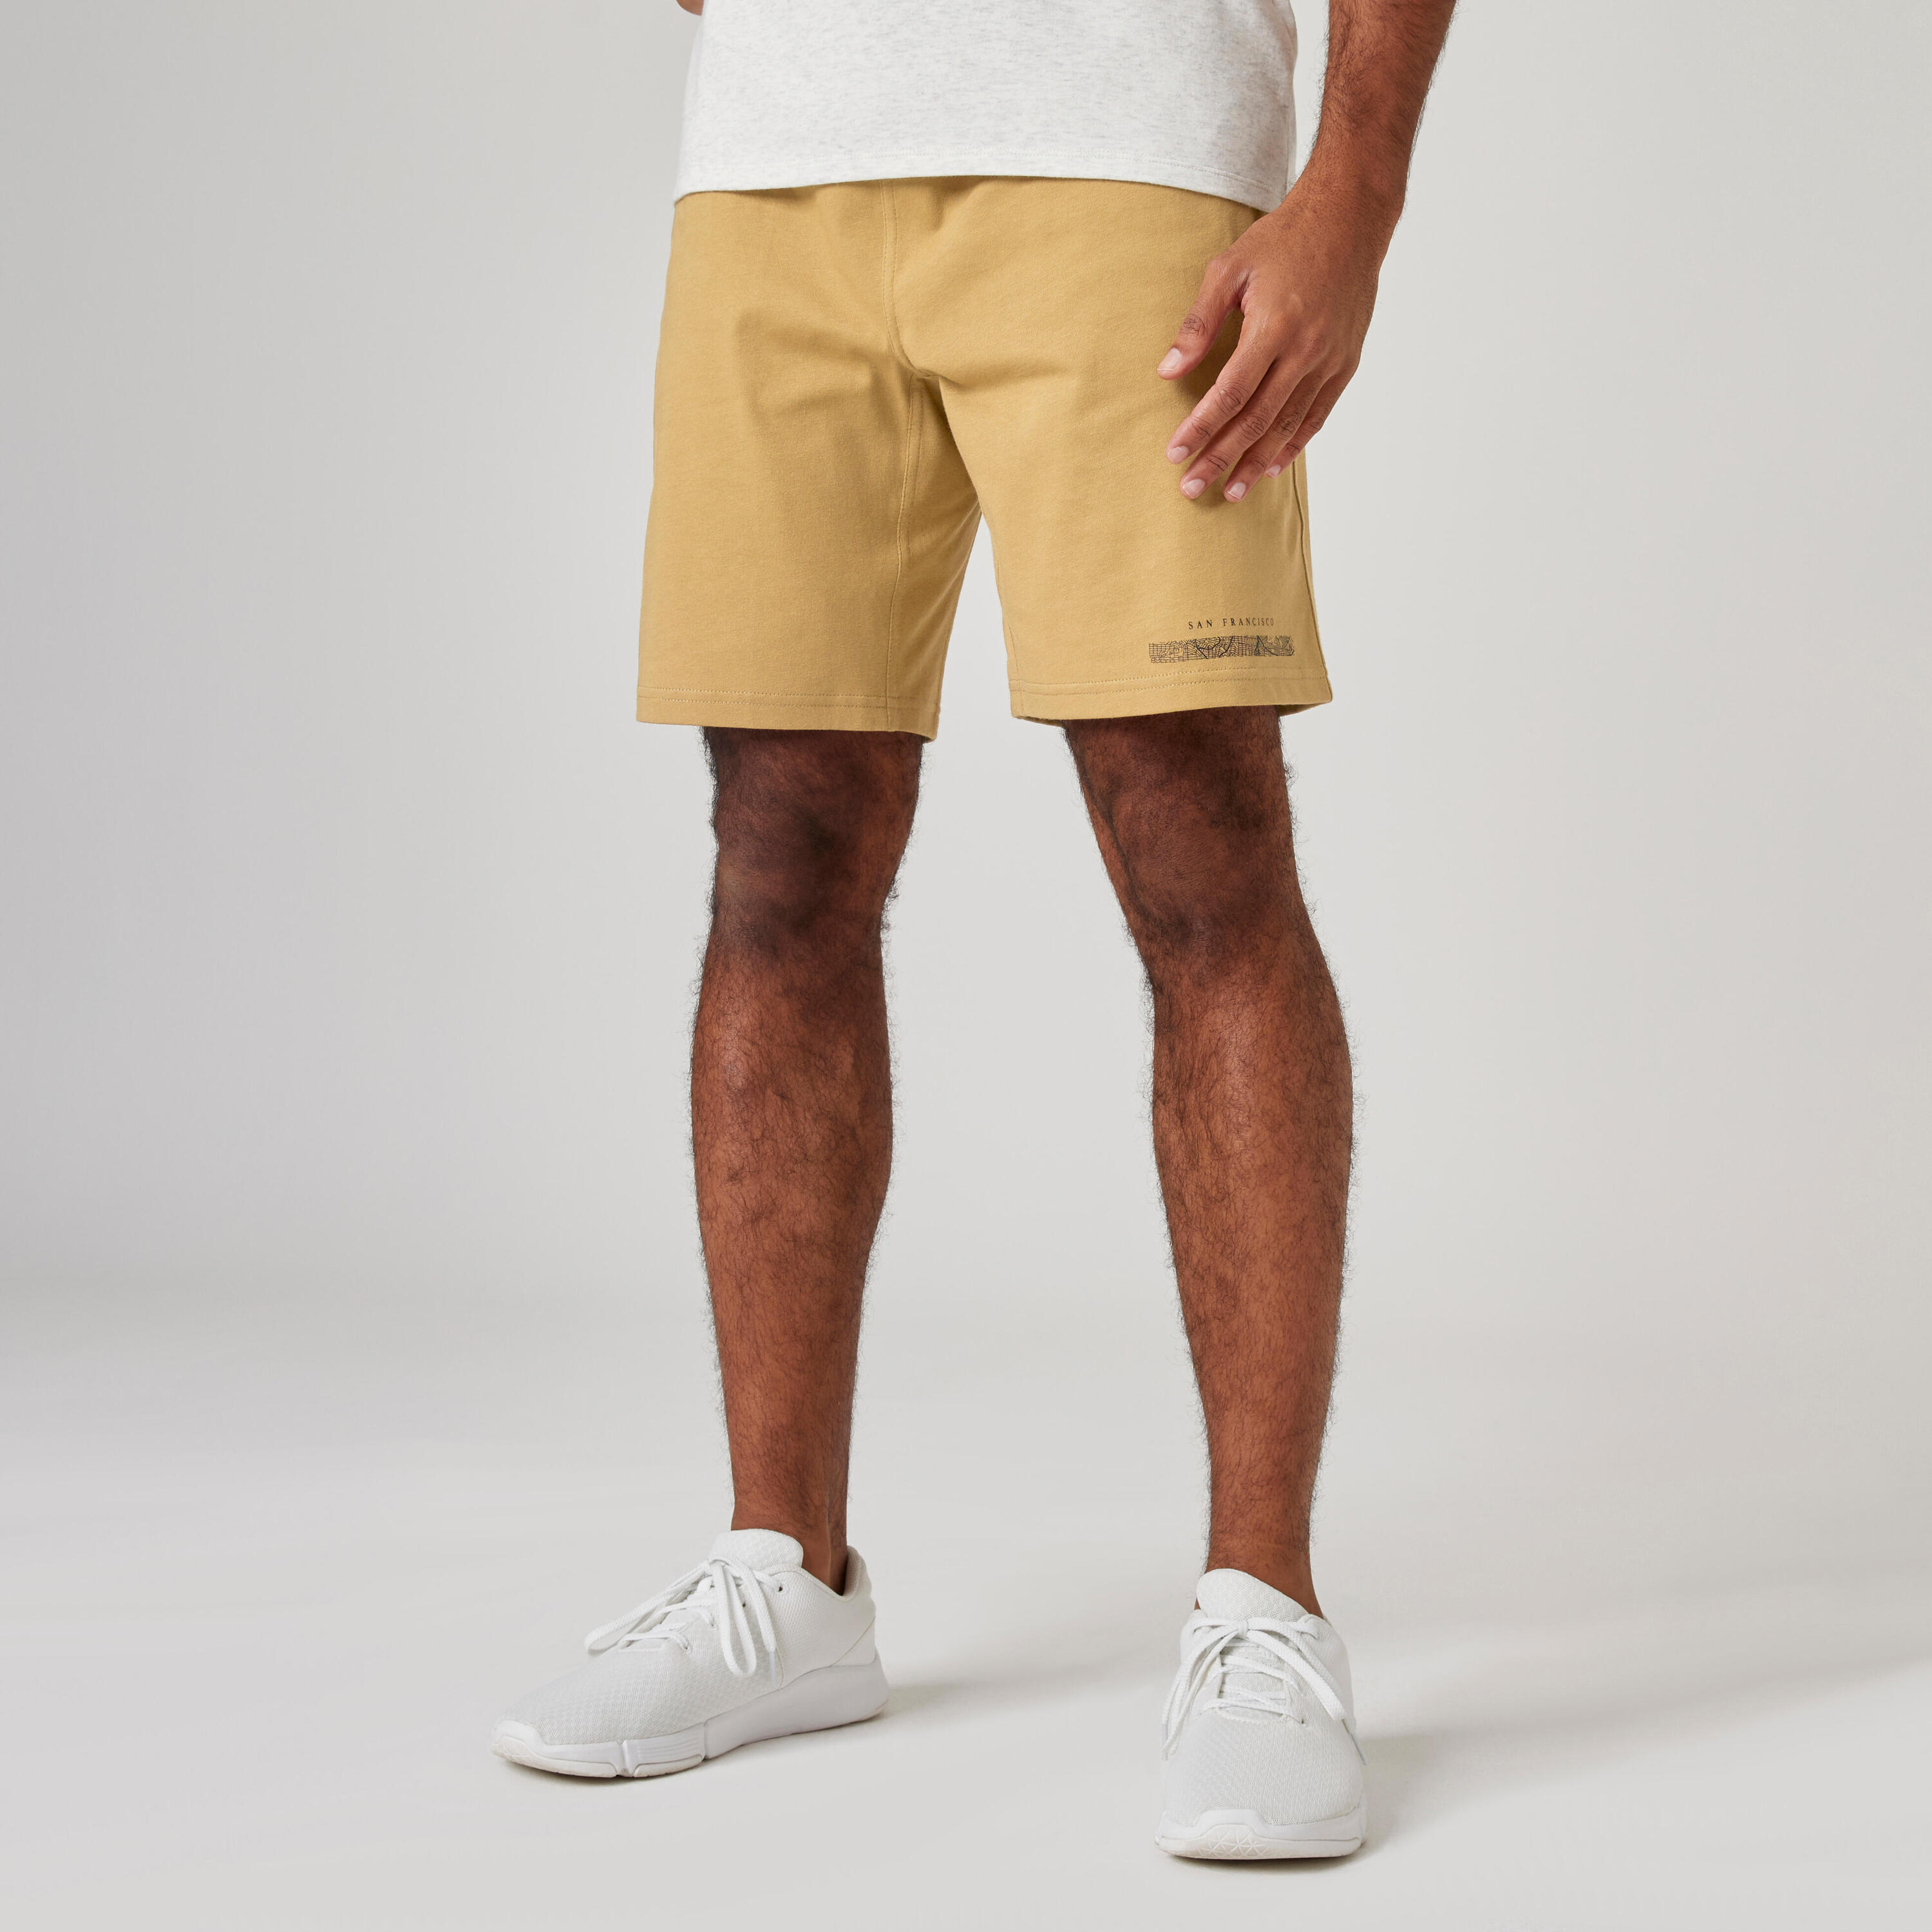 DOMYOS Men's Straight-Cut Cotton Fitness Shorts with Pocket - Beige